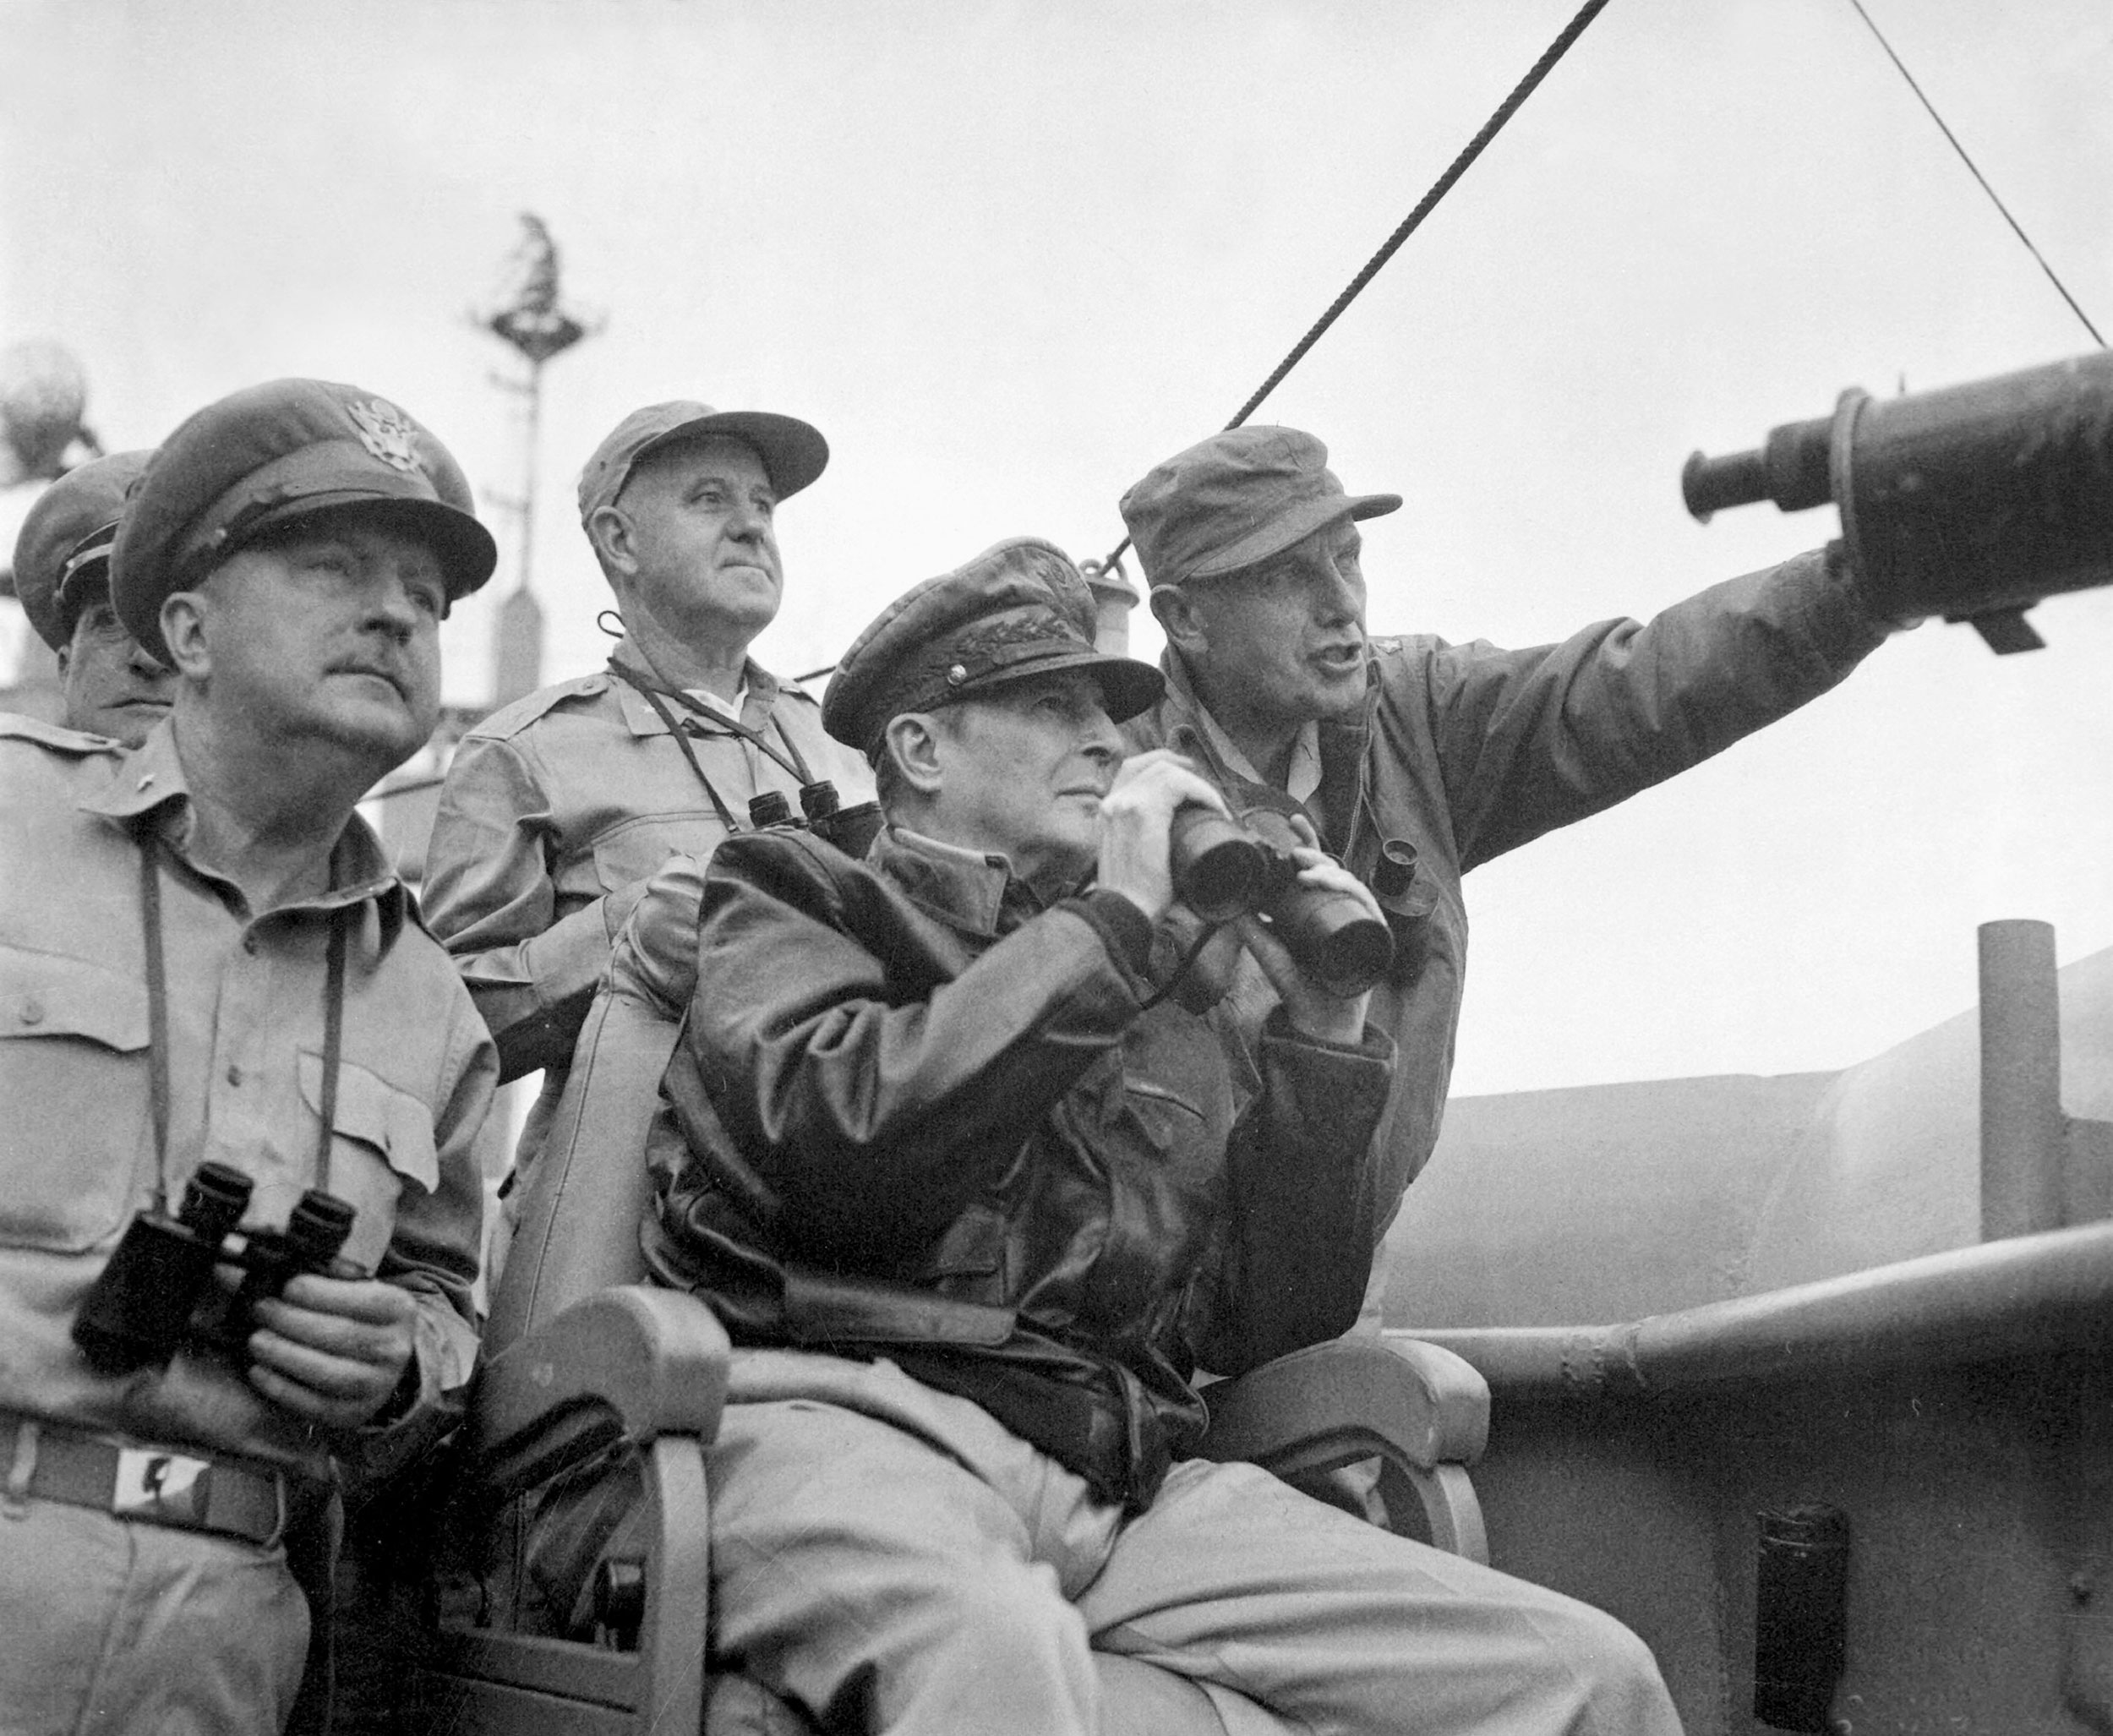 Brigadier General Courtney Whitney; General Douglas MacArthur, Commander-in-Chief, United Nations Command; and Major General Edward M. Almond observe shelling of Inchon from USS Mount McKinley